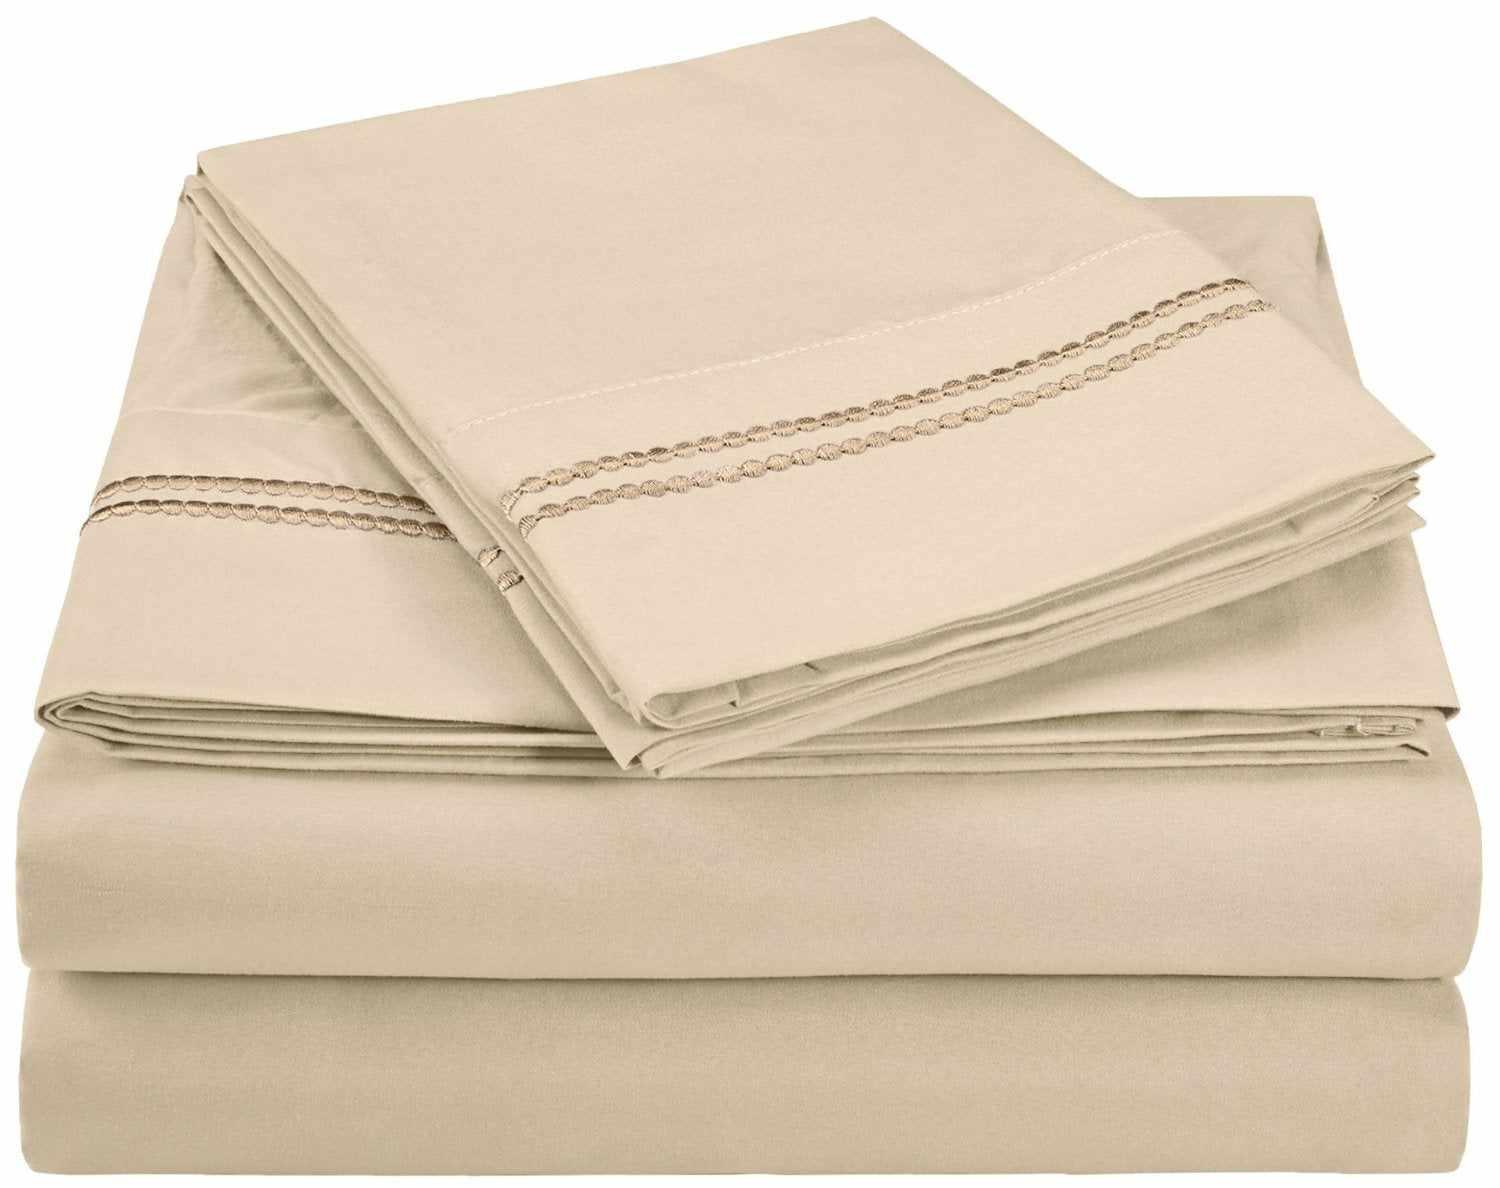  Superior Microfiber Wrinkle Resistant and Breathable Solid 2-Line Embroidery Deep Pocket Bed Sheet Set - Tan